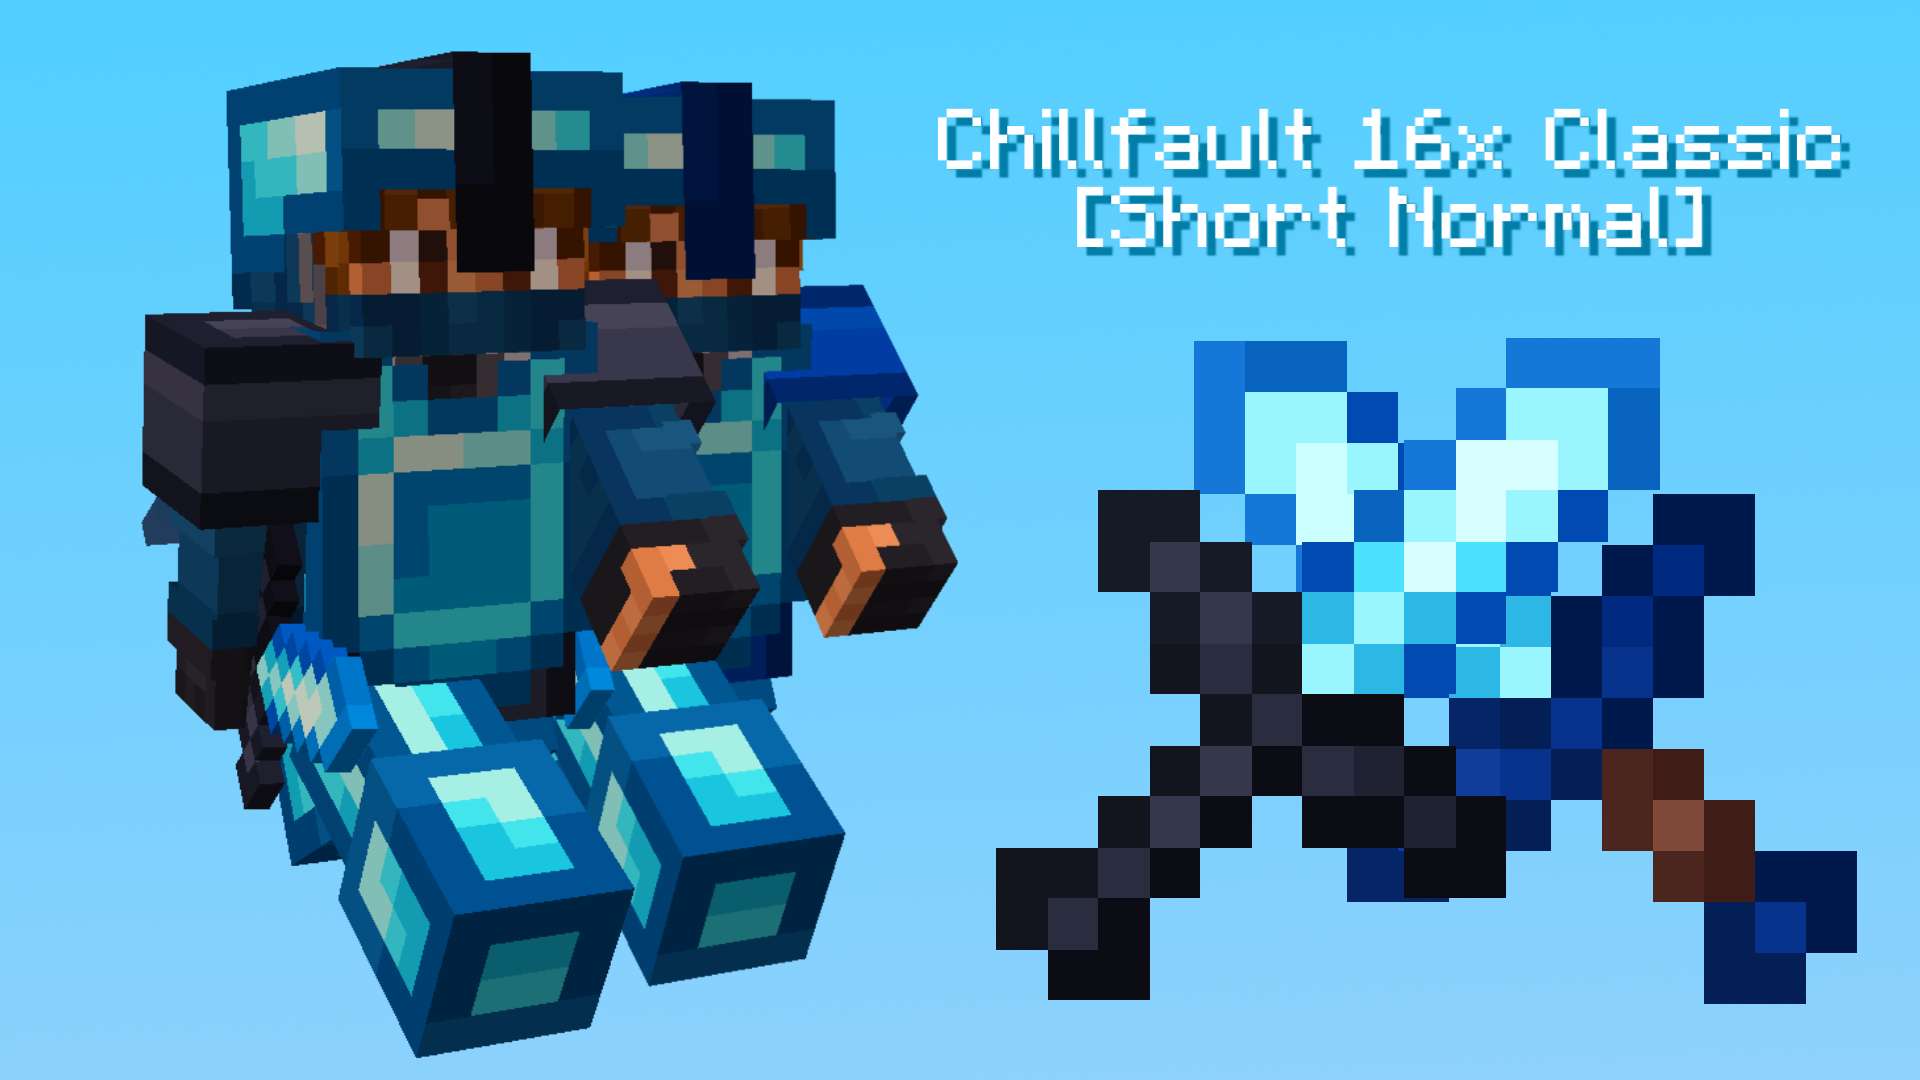 Chillfault  Classic [Short Normal] 16x by Jes13 on PvPRP